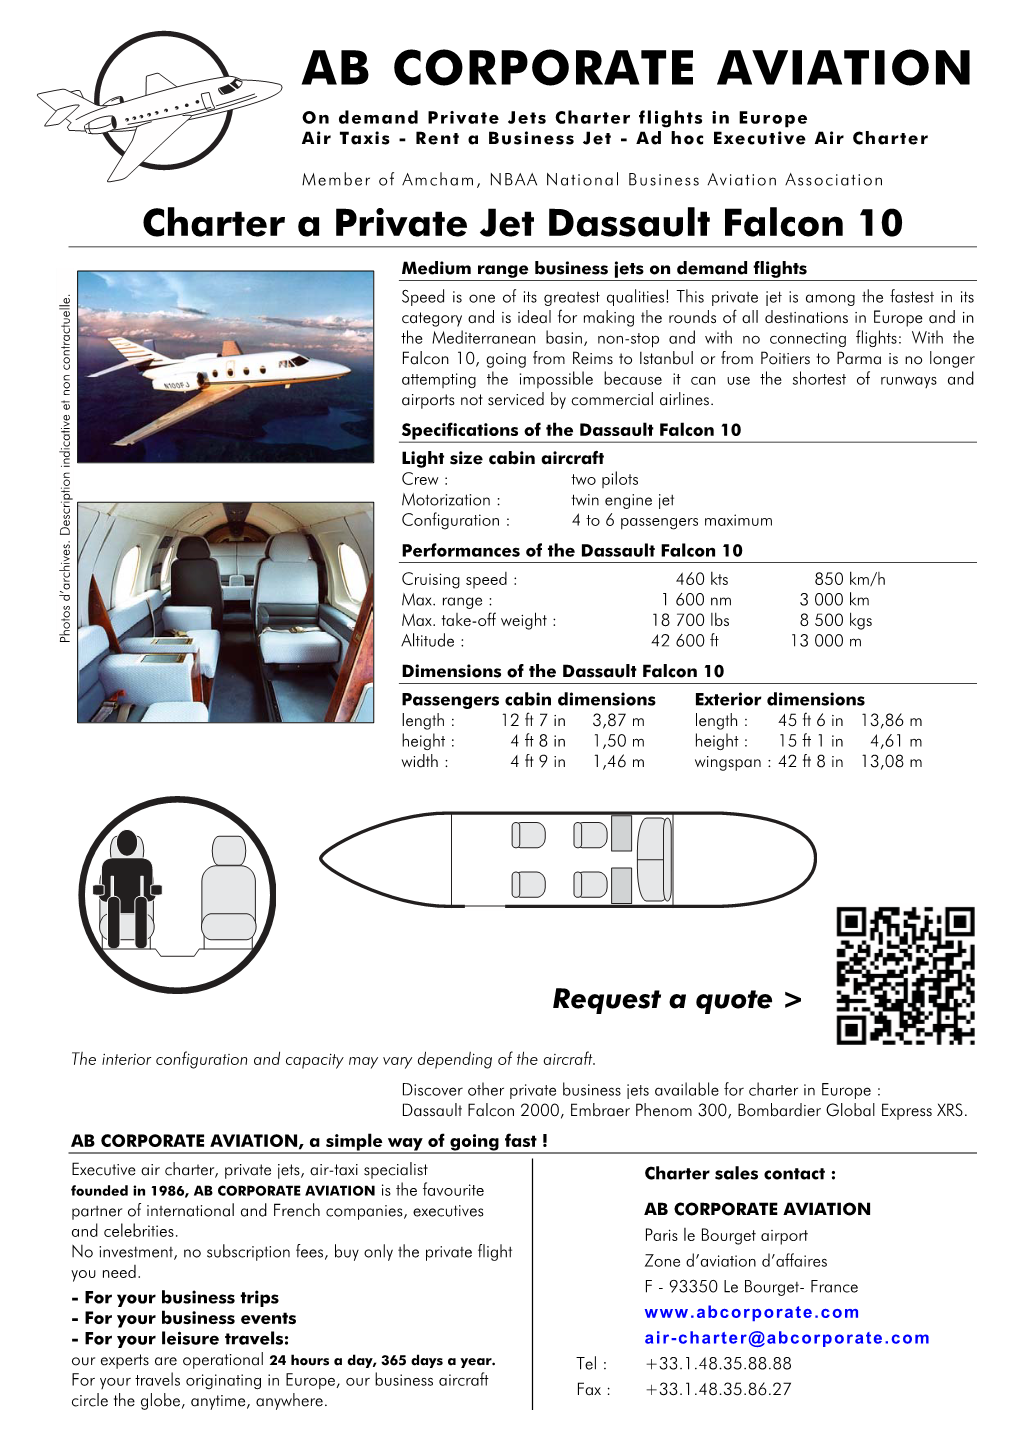 Dassault Falcon 10 Business Jets Air Charter Flights in Europe